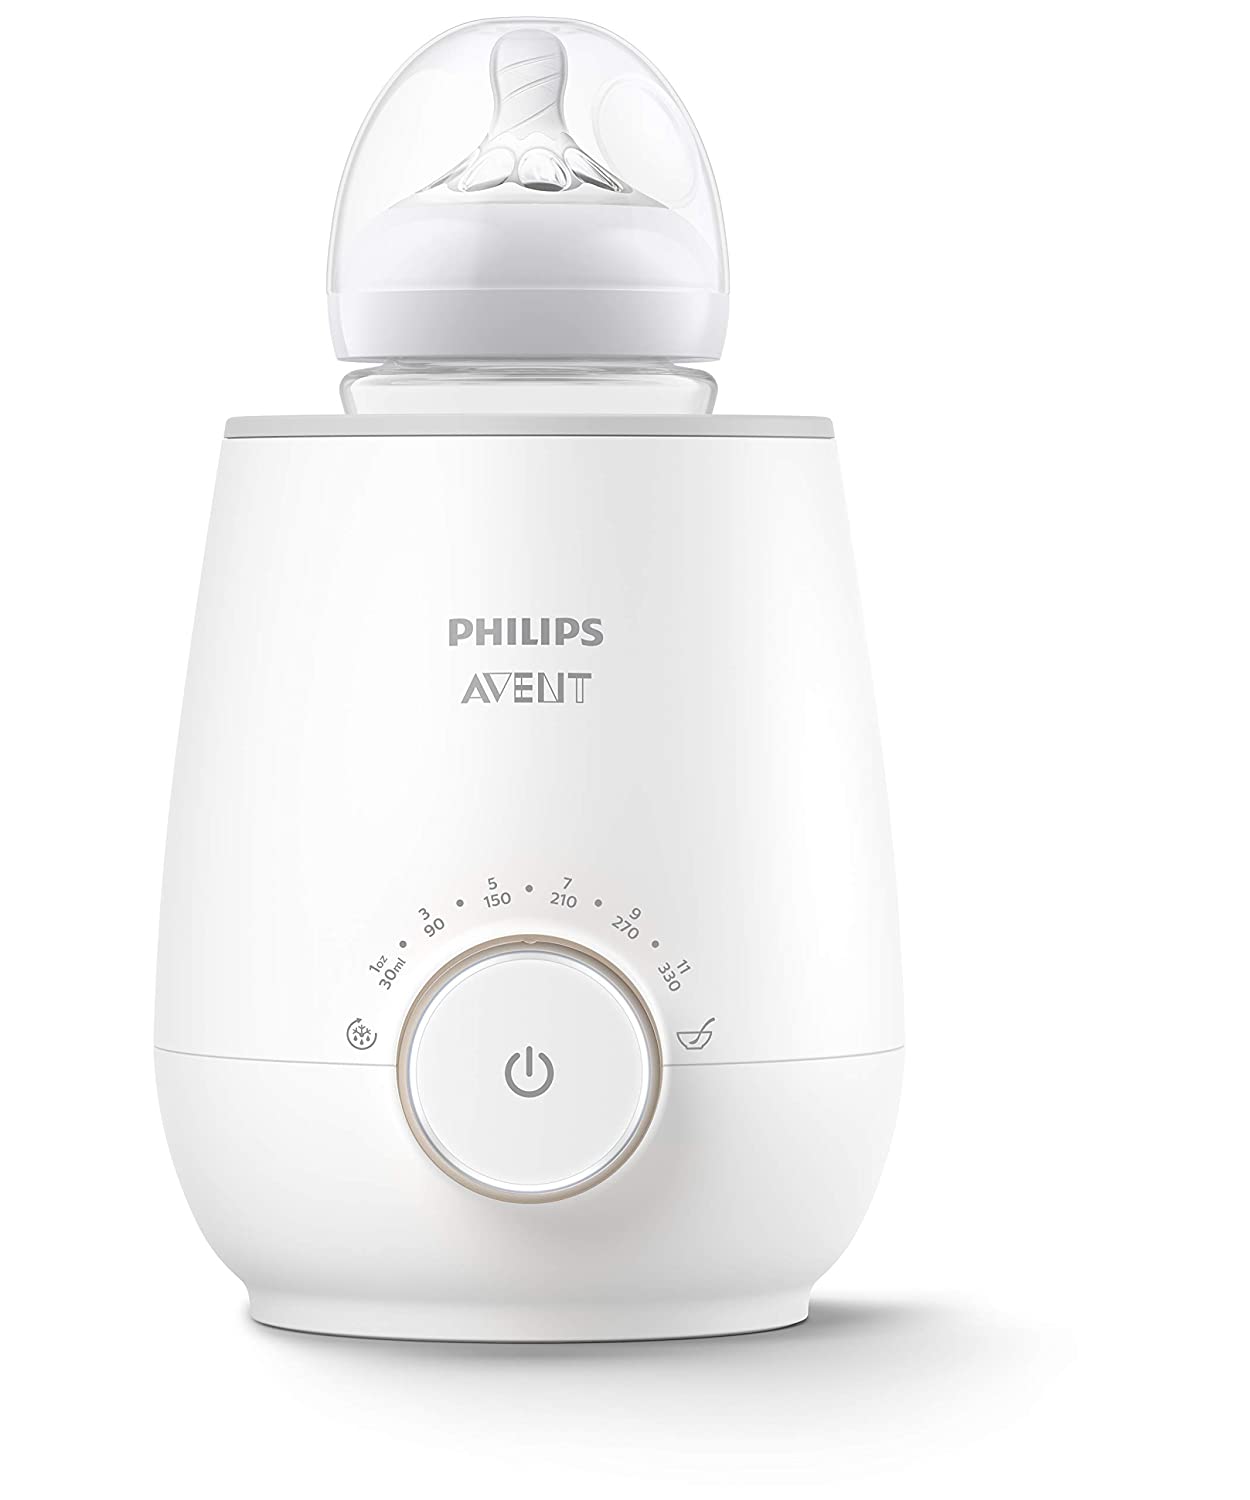 Philips AVENT SCF358/00 Bottle Warmer, for Quick and Even Heating of Milk and Baby Food, White